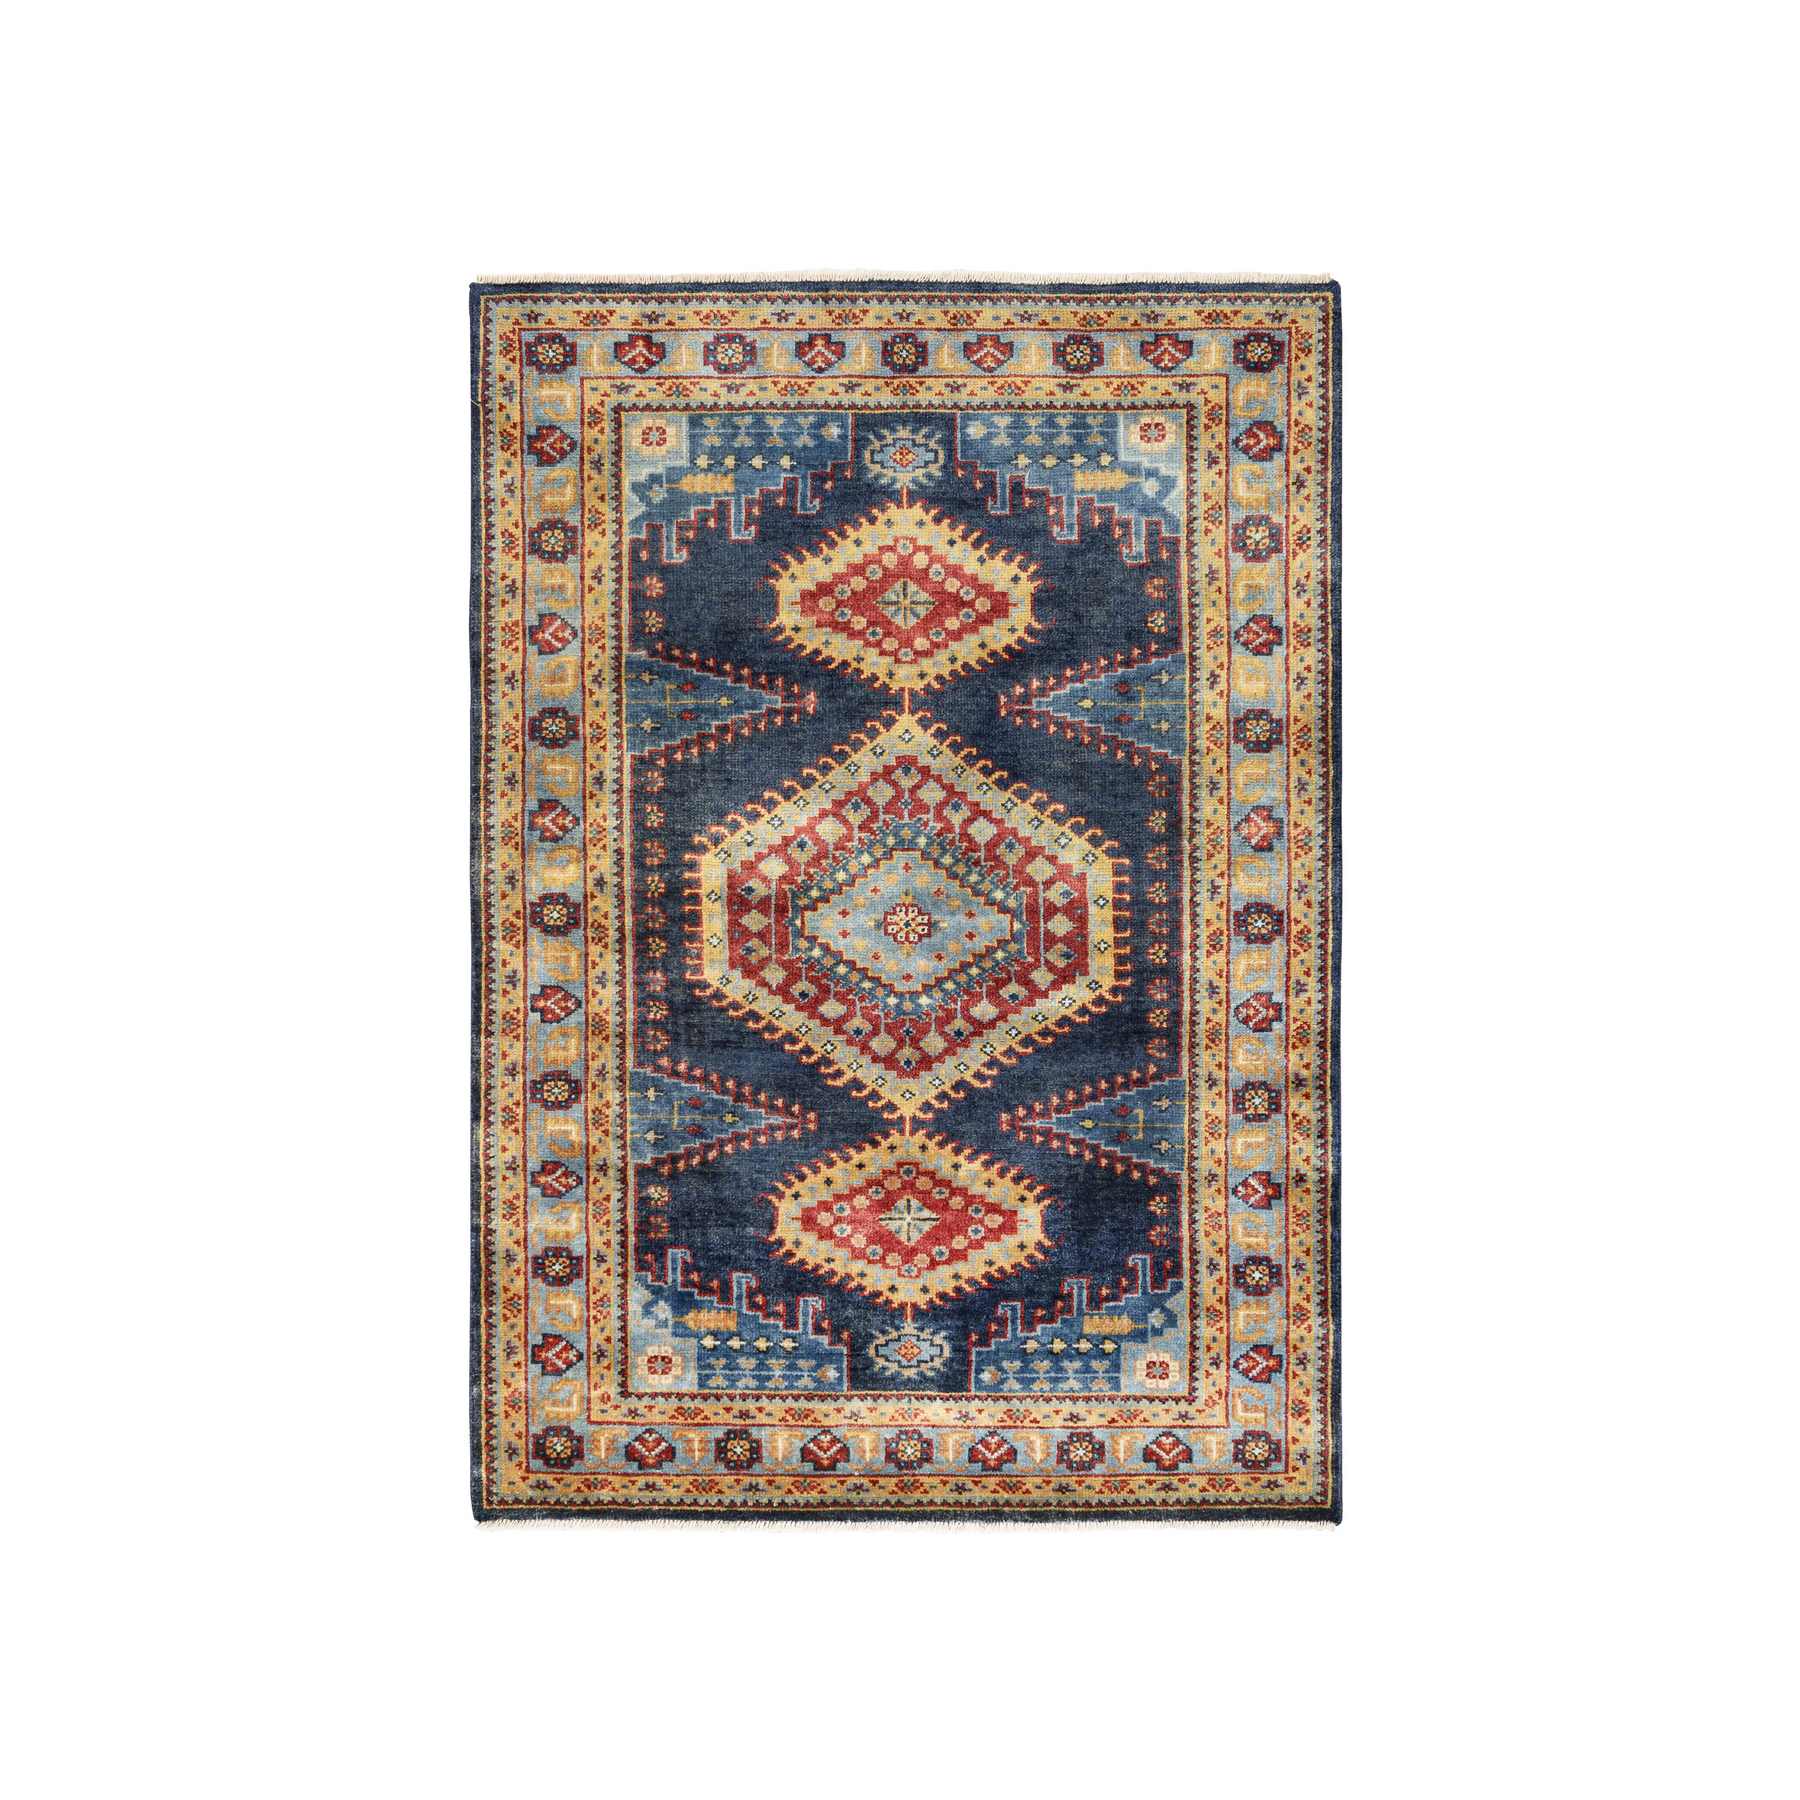 2' x 3' Handmade Persian Design made out of natural wool natural dyes throw rug